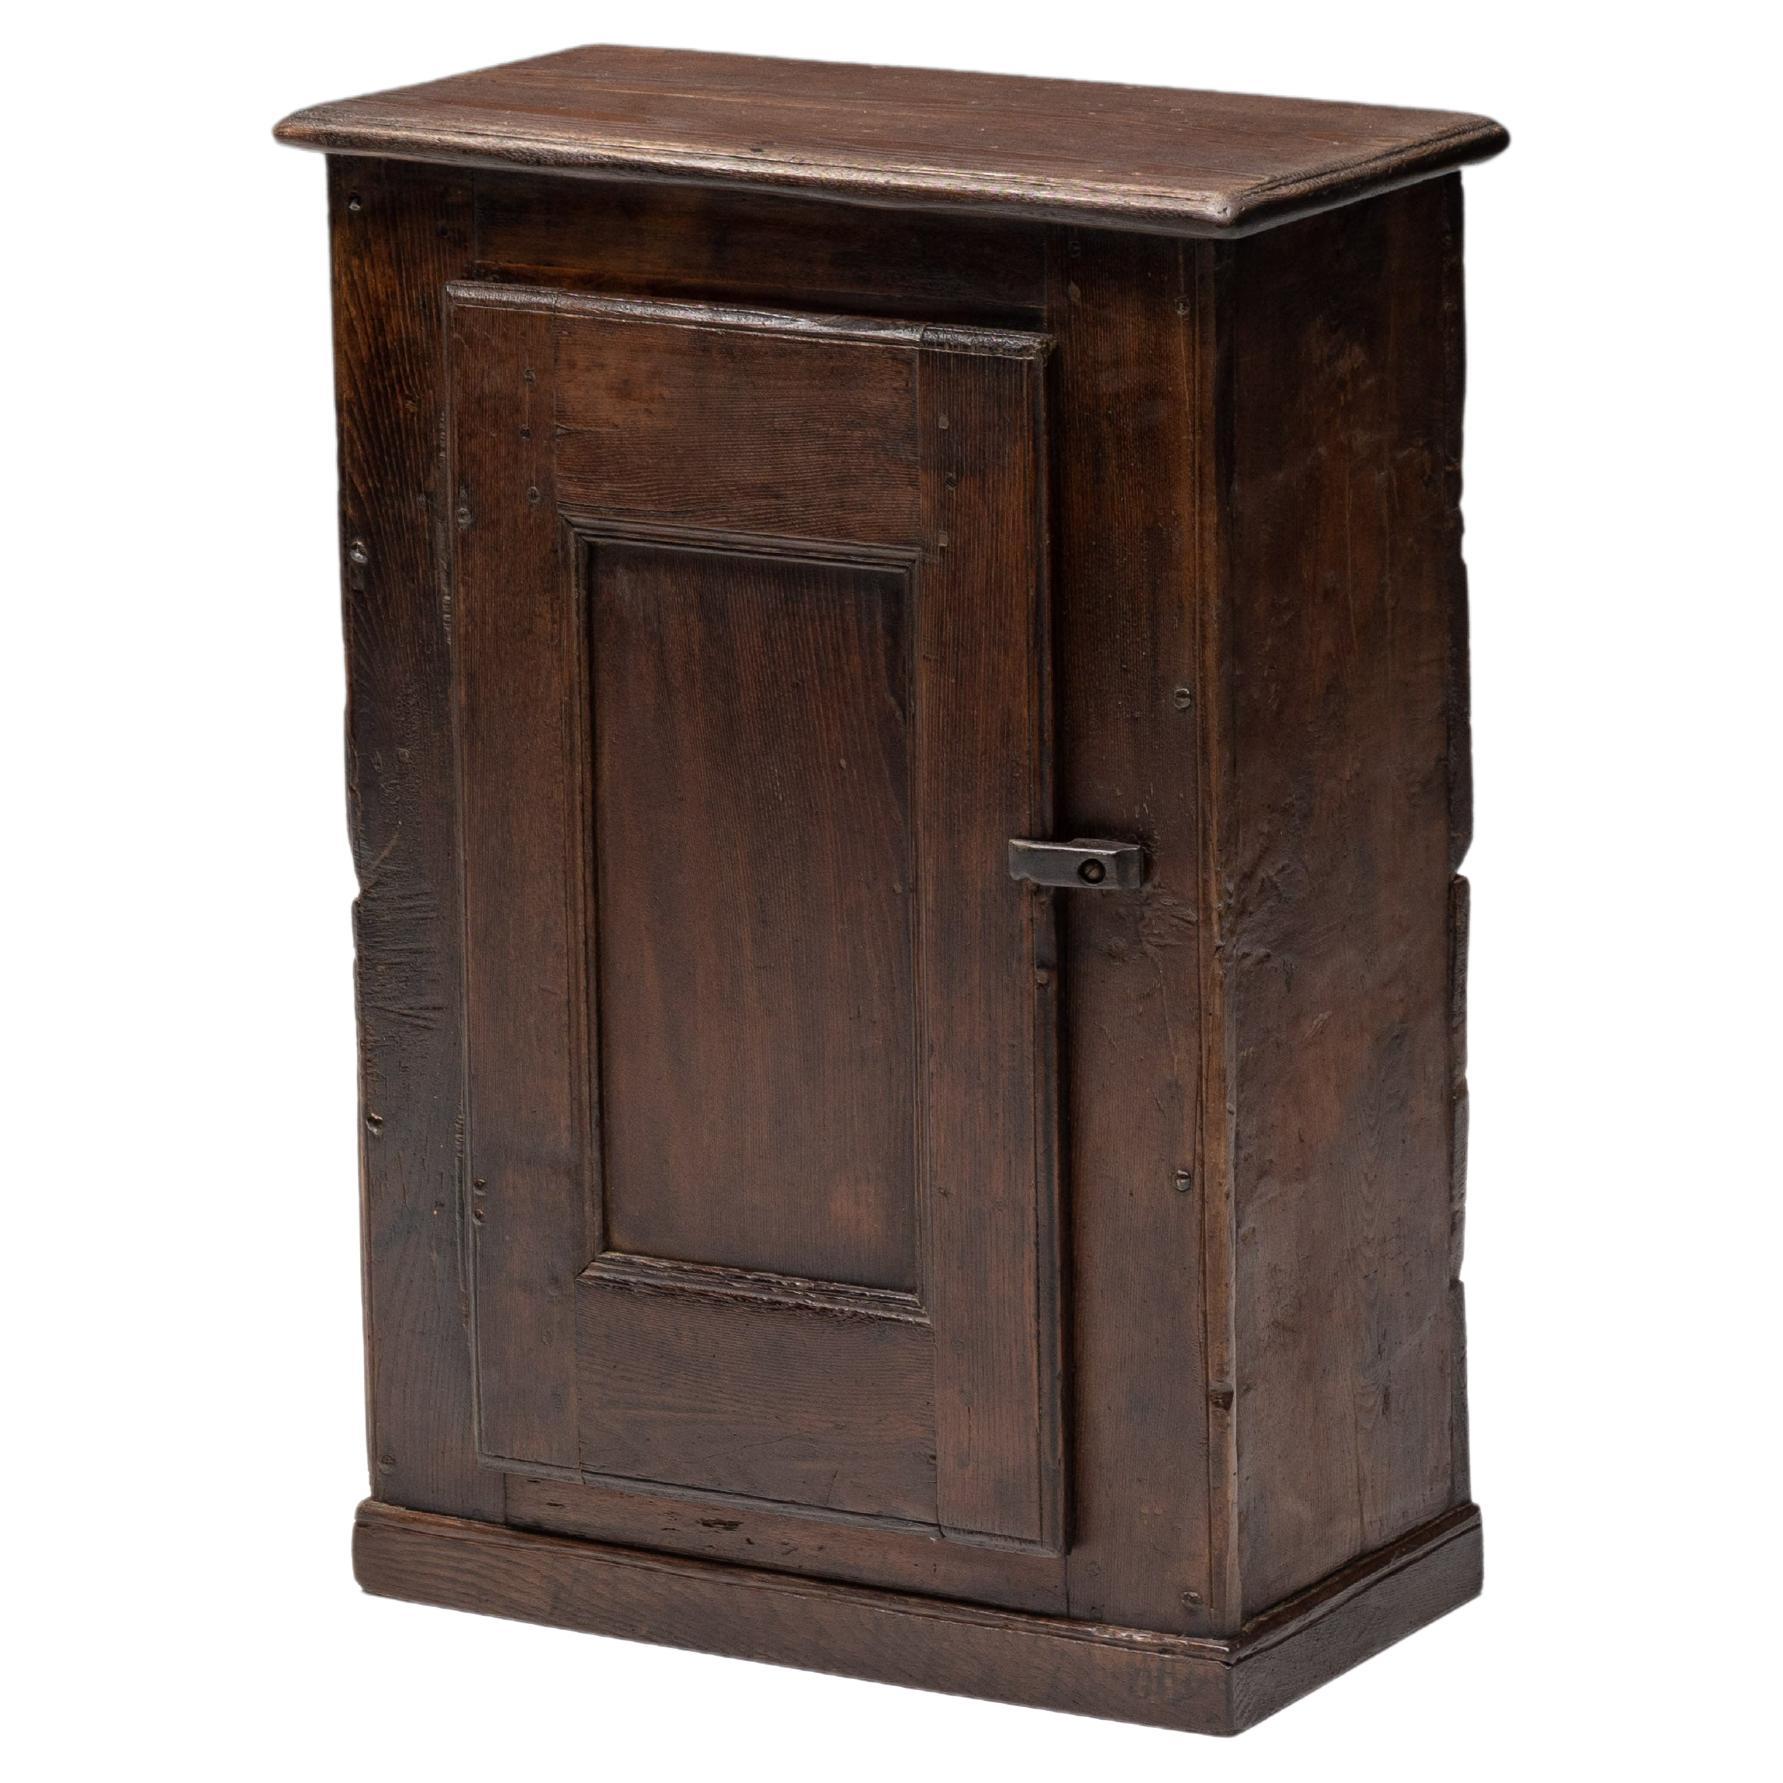 Rustic Art Populaire Cabinet or Confiturier, France, 19th Century For Sale